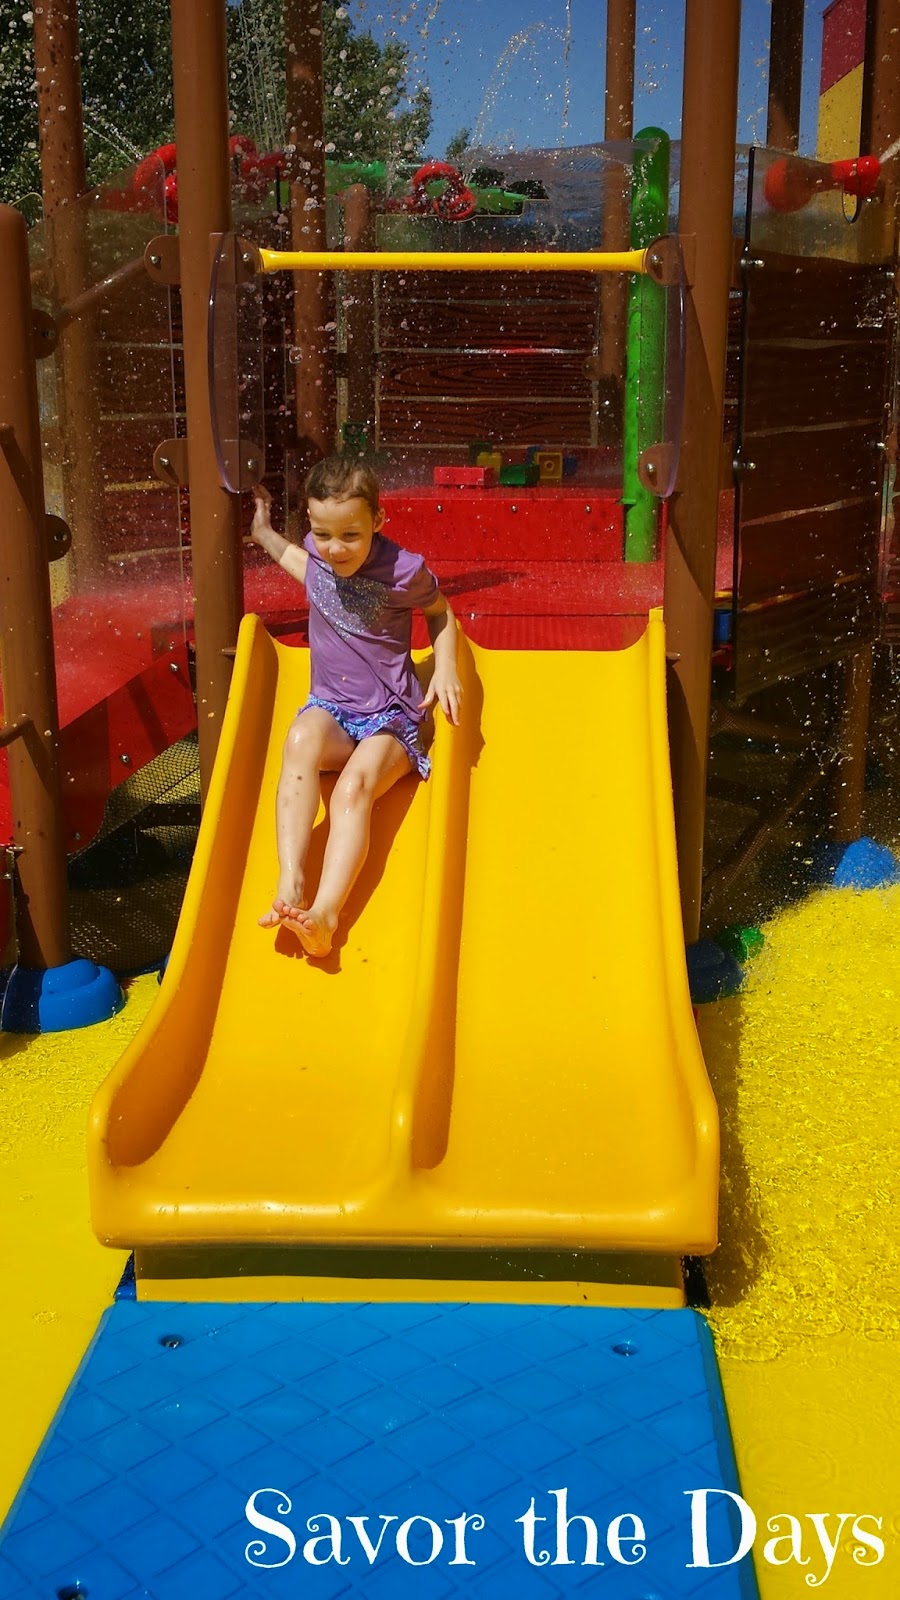 Slides at Pirate Beach Legoland Discovery Center in Grapevine